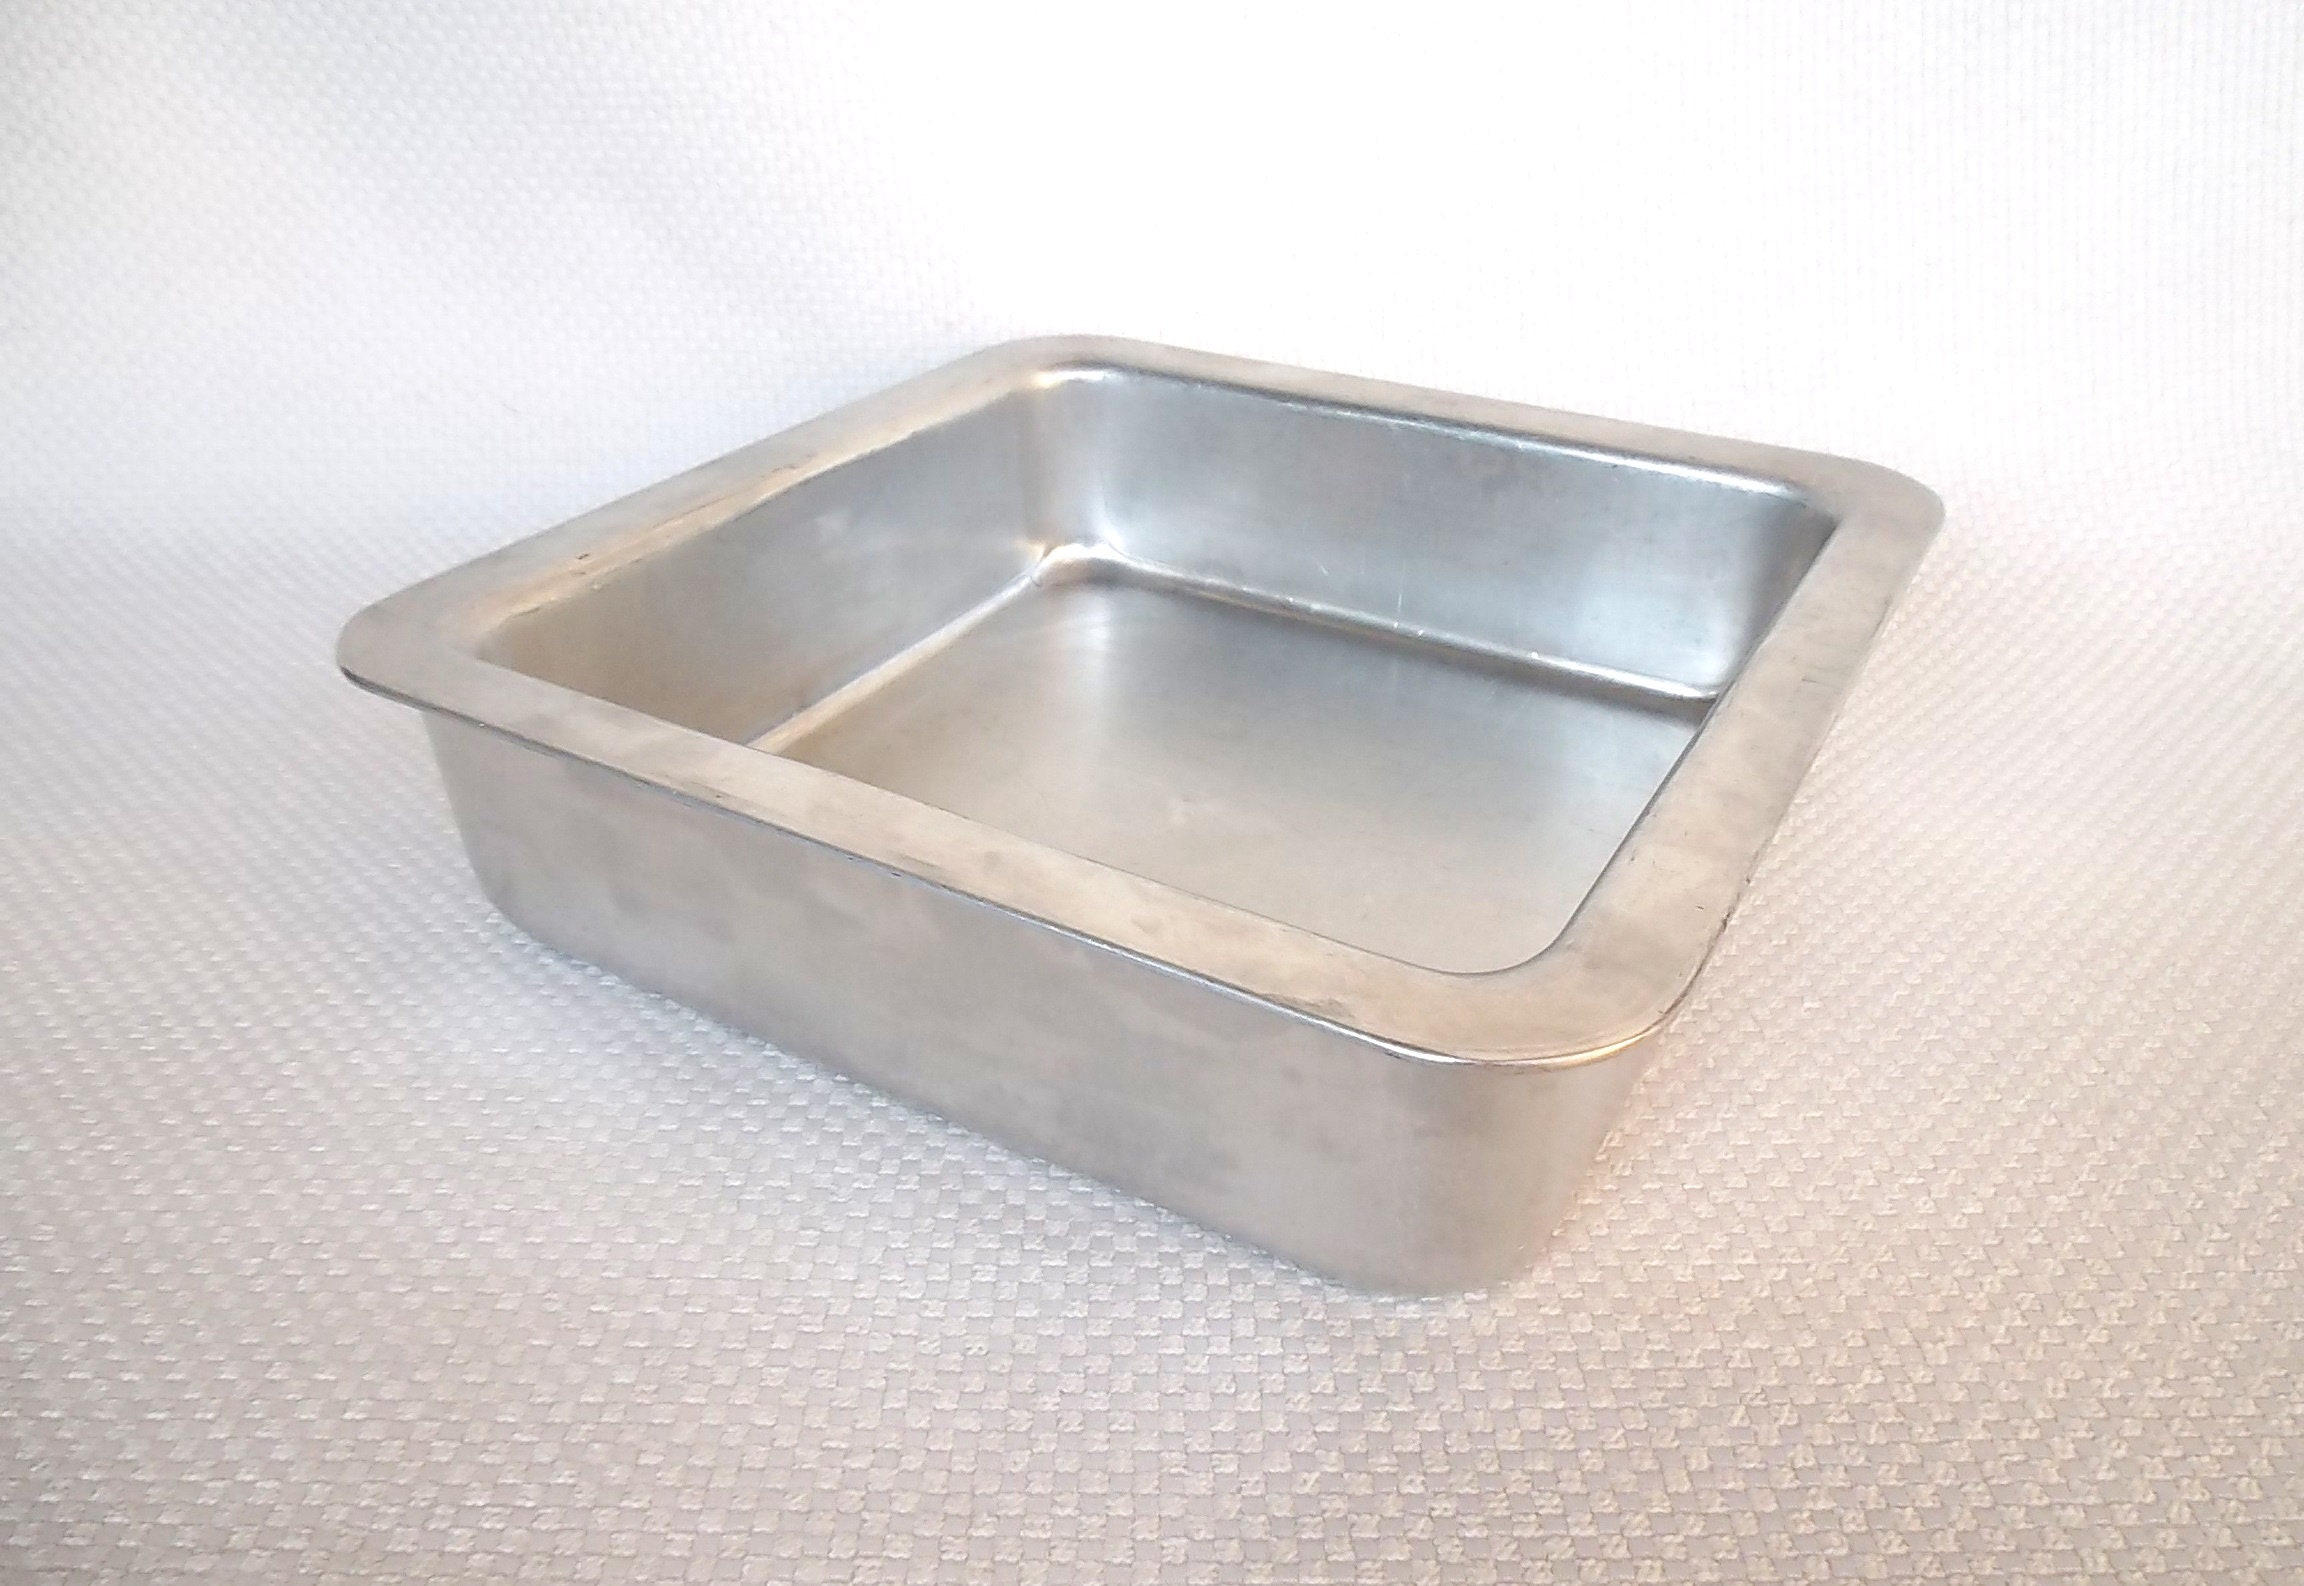 Vintage Aluminum Square Baking Pan 8 x 8 x 2 Cake Brownie Unbranded  Sturdy